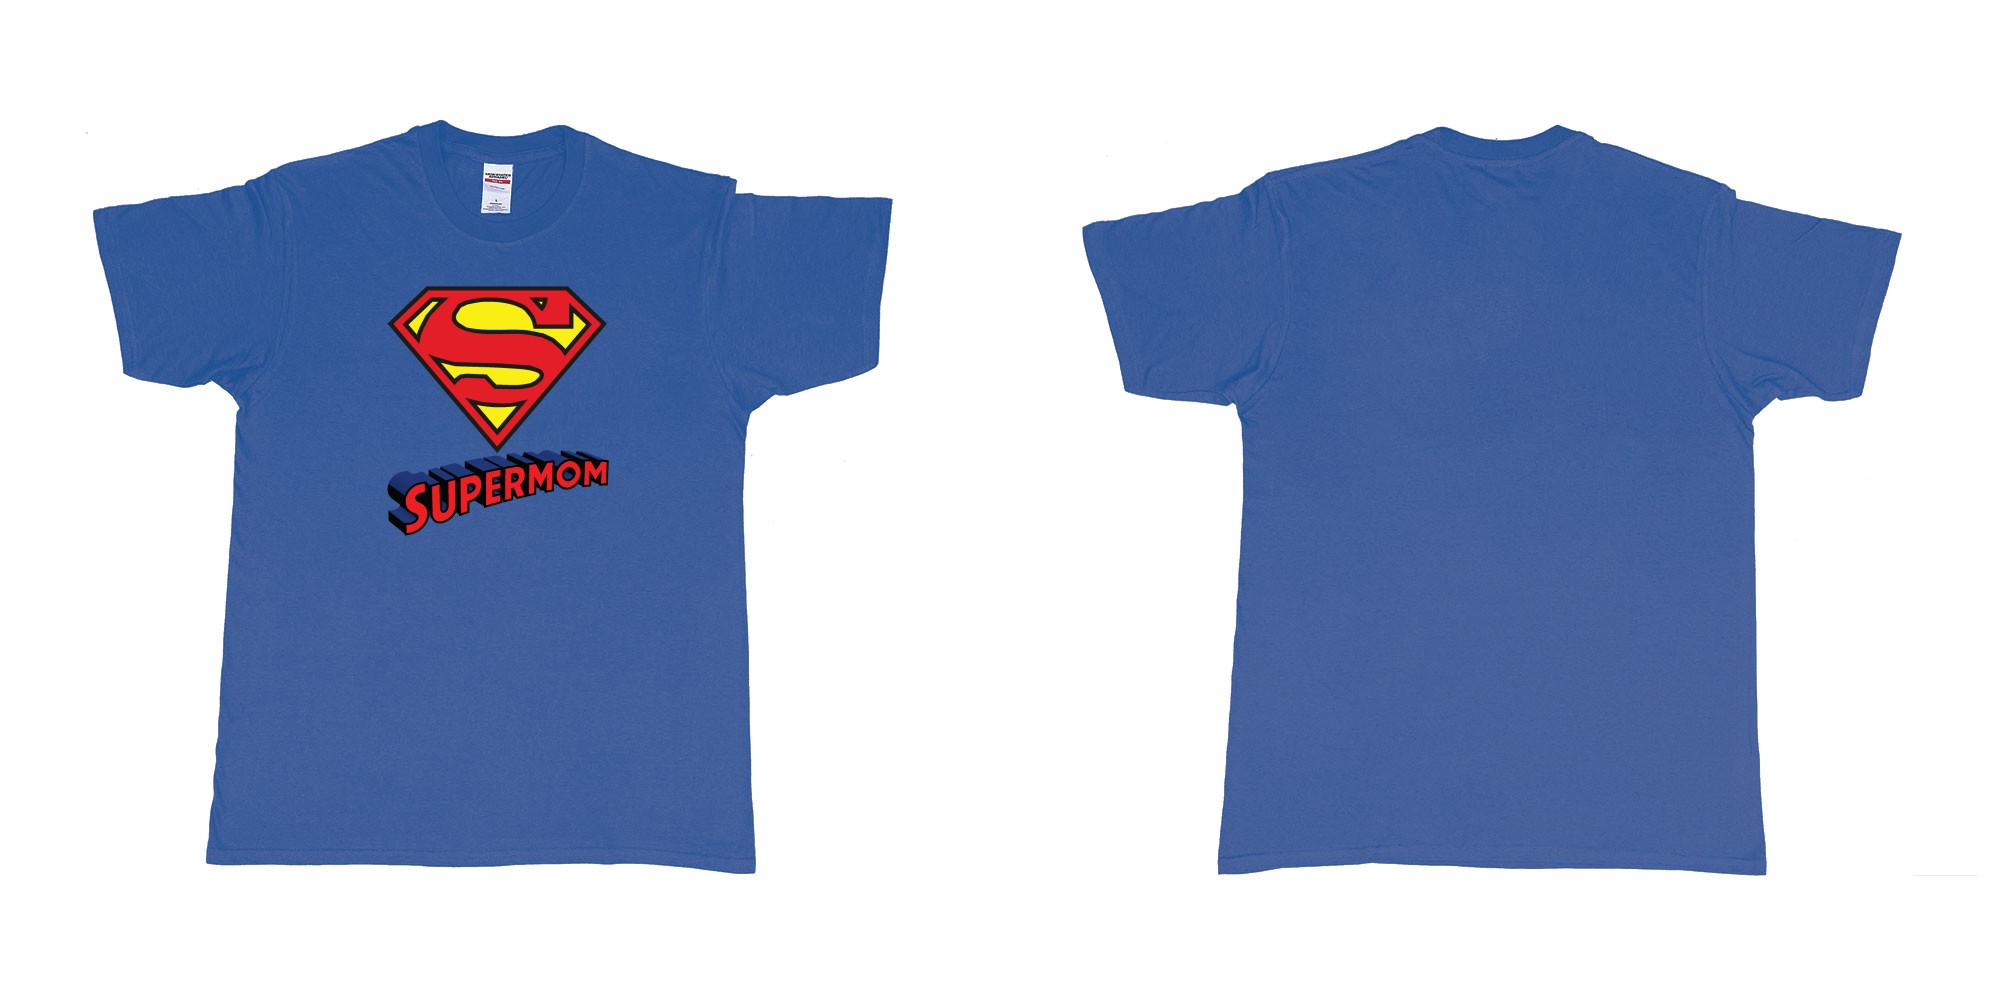 Custom tshirt design superman logo with own custom text print bali in fabric color royal-blue choice your own text made in Bali by The Pirate Way